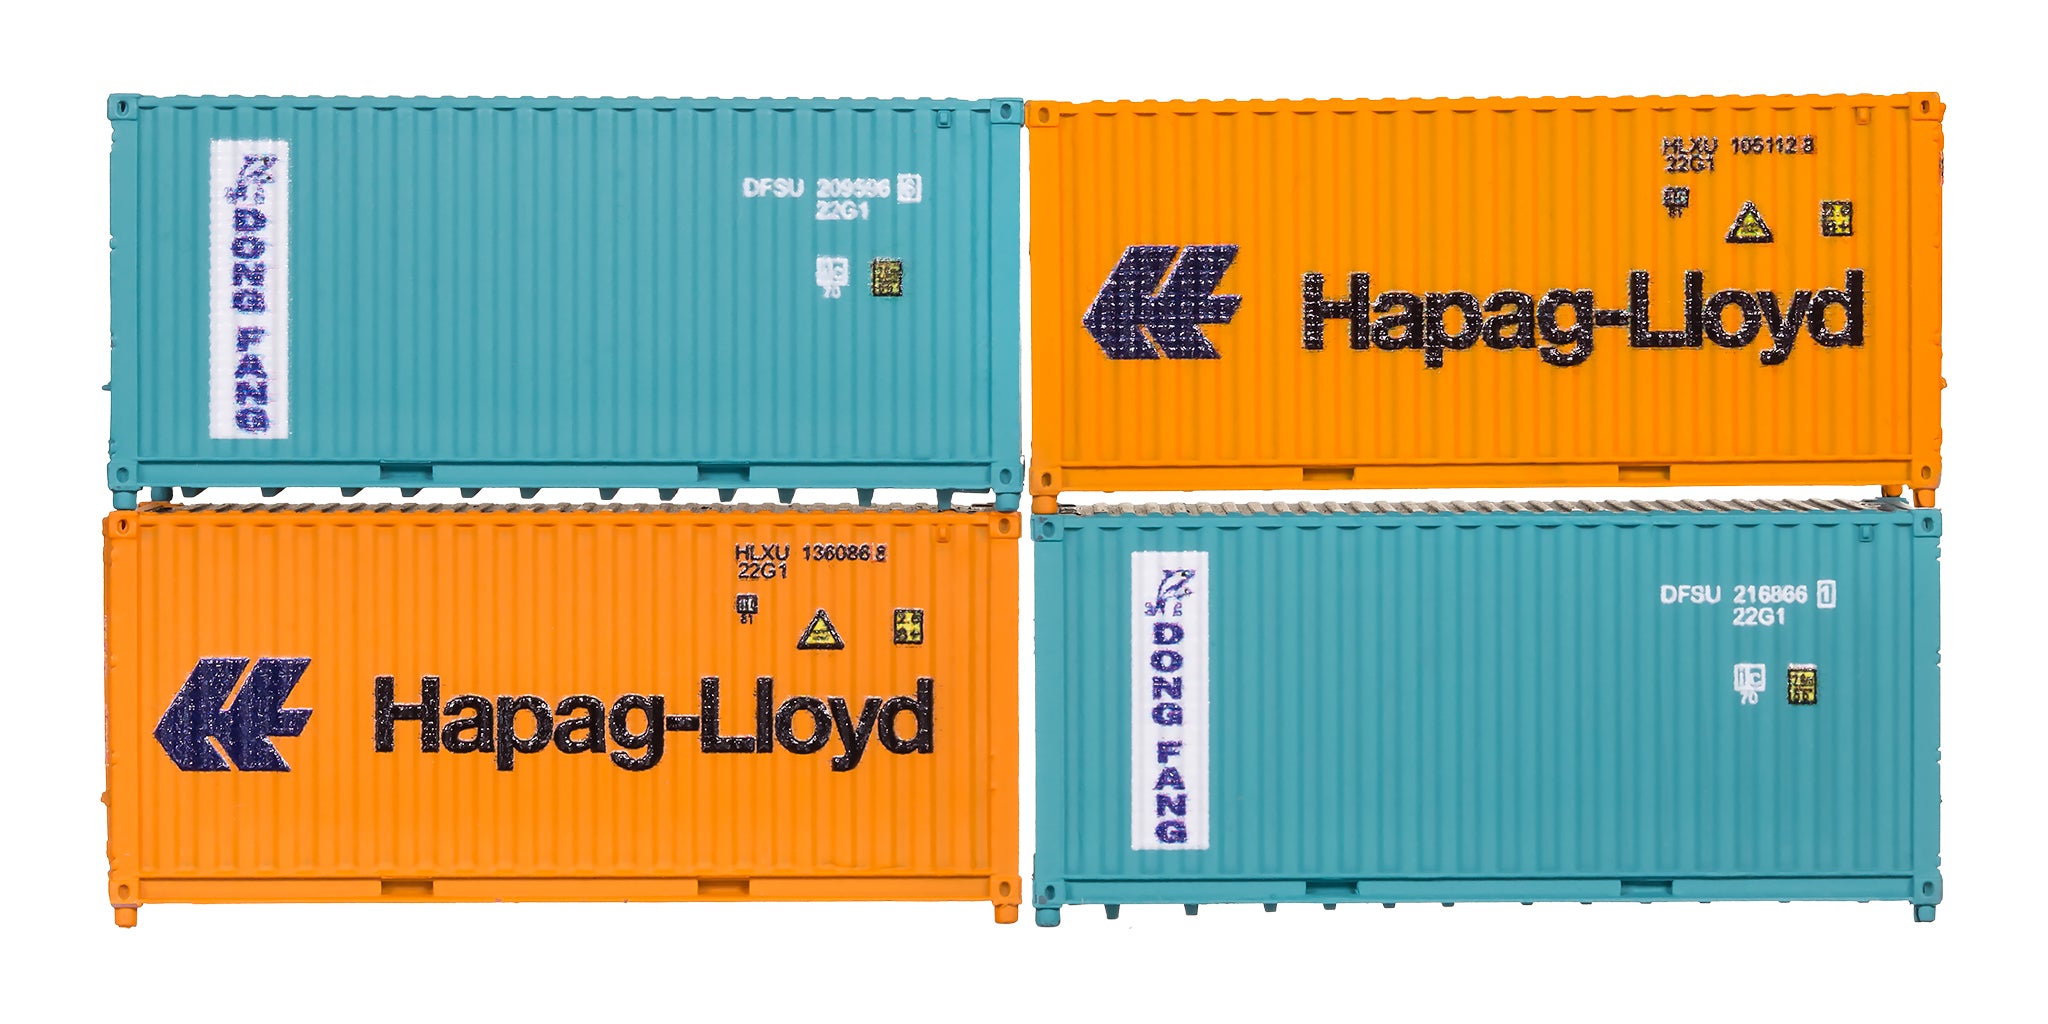 2F-028-206 N Gauge 20' Containers Hapag Lloyd 136086 8 Dong Fang 216866 1